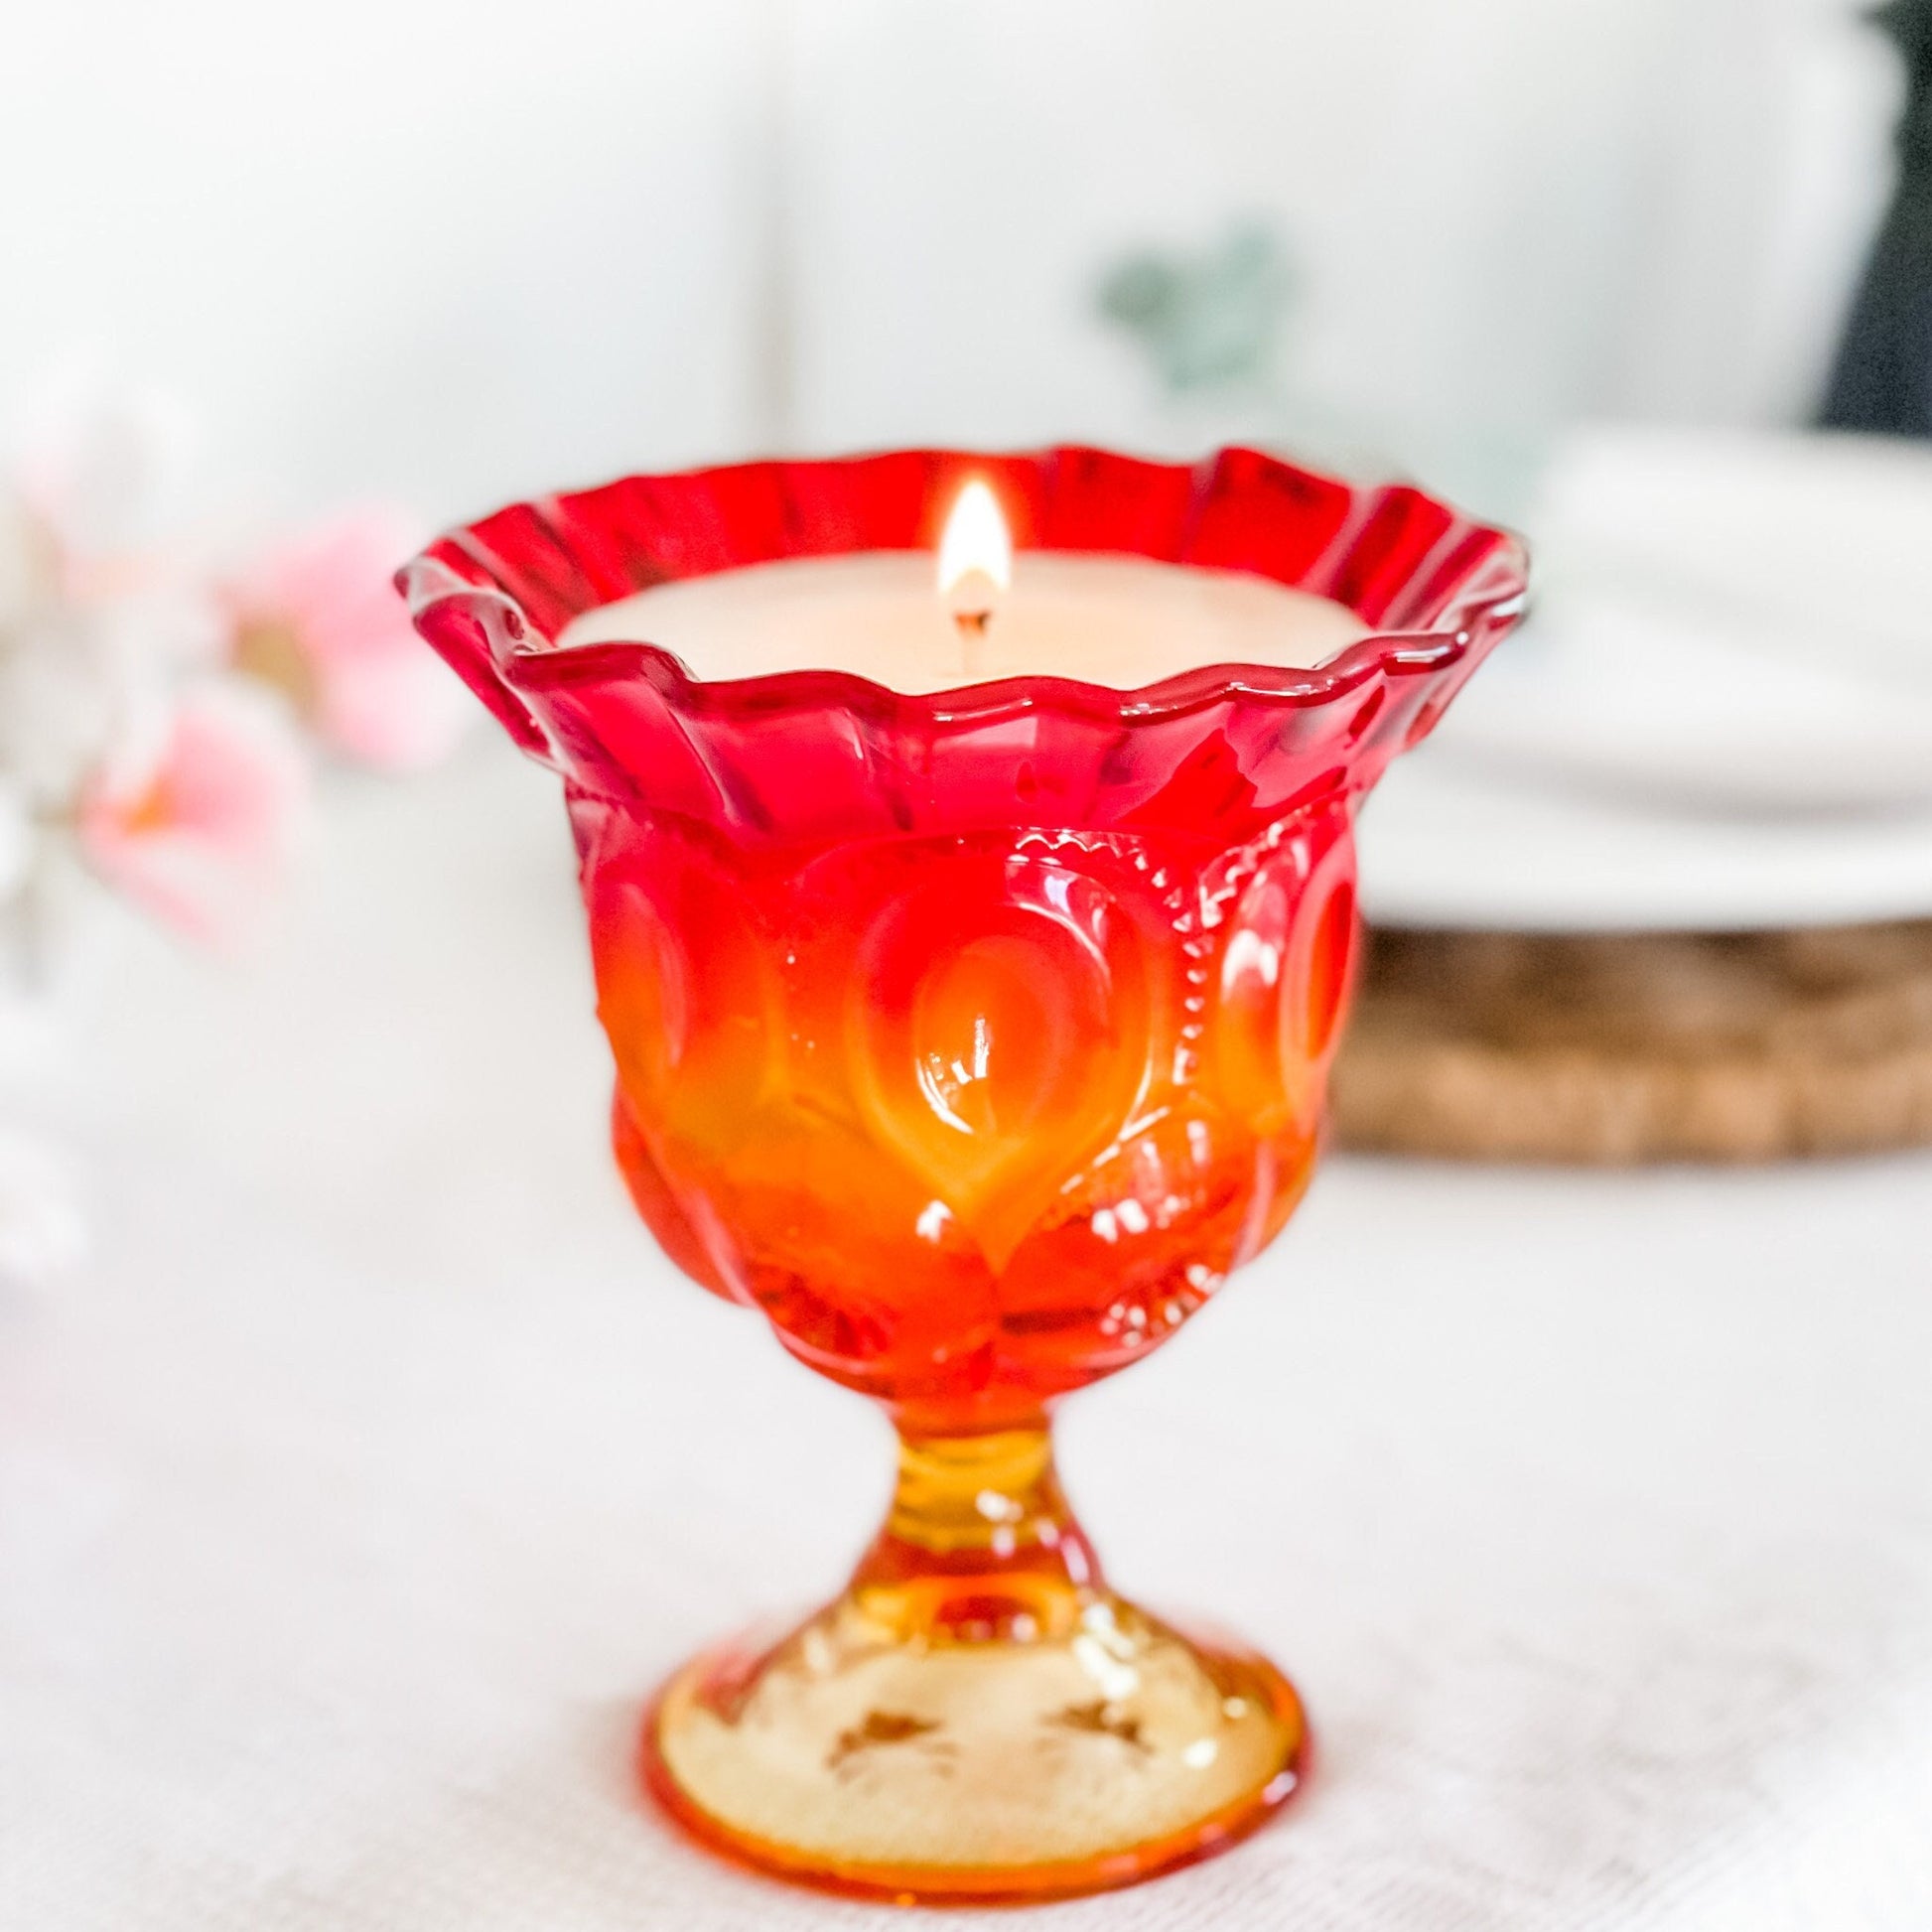 Scented Candle, Vintage Glass, Best Friend Gifts, Birthday Gifts For Her